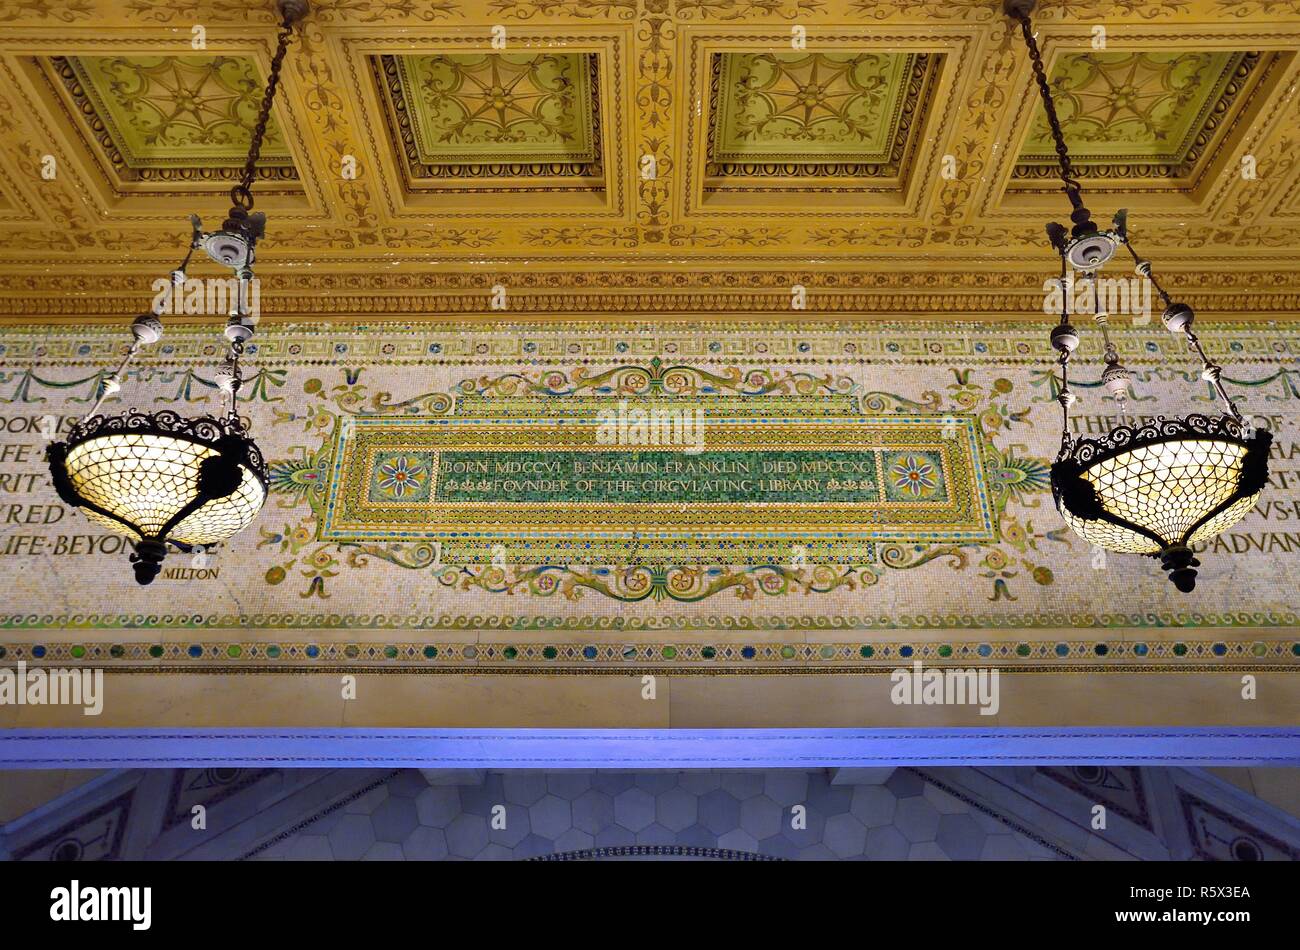 Chicago, Illinois, USA. Detailed, inlaid tile illuminated by glass chandeliers in the Cultural Center. Stock Photo